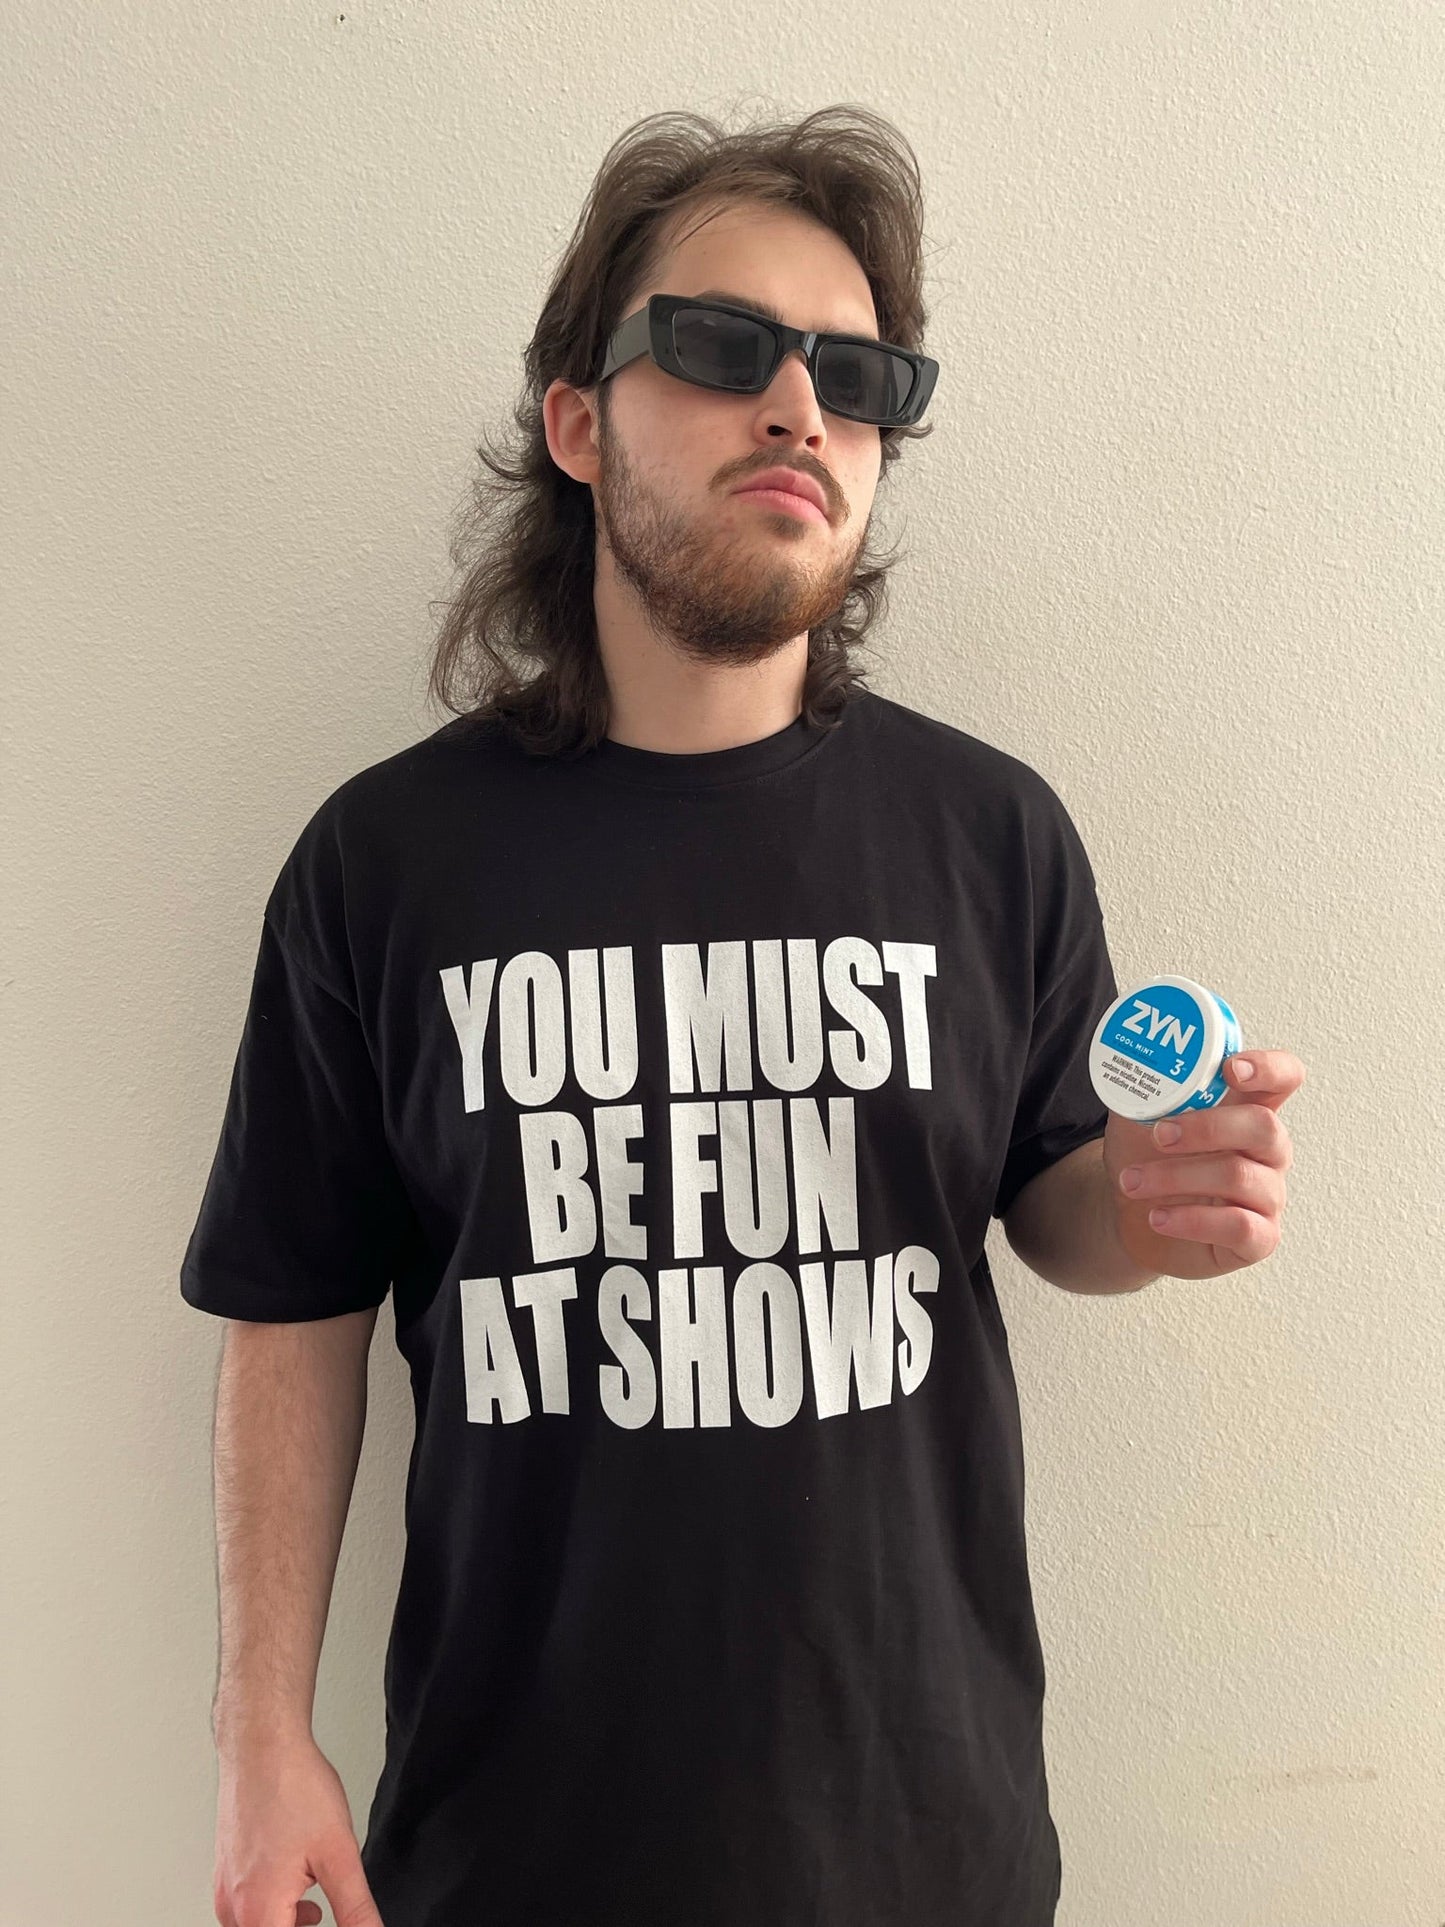 YOU MUST BE FUN AT SHOWS - neopunkfm